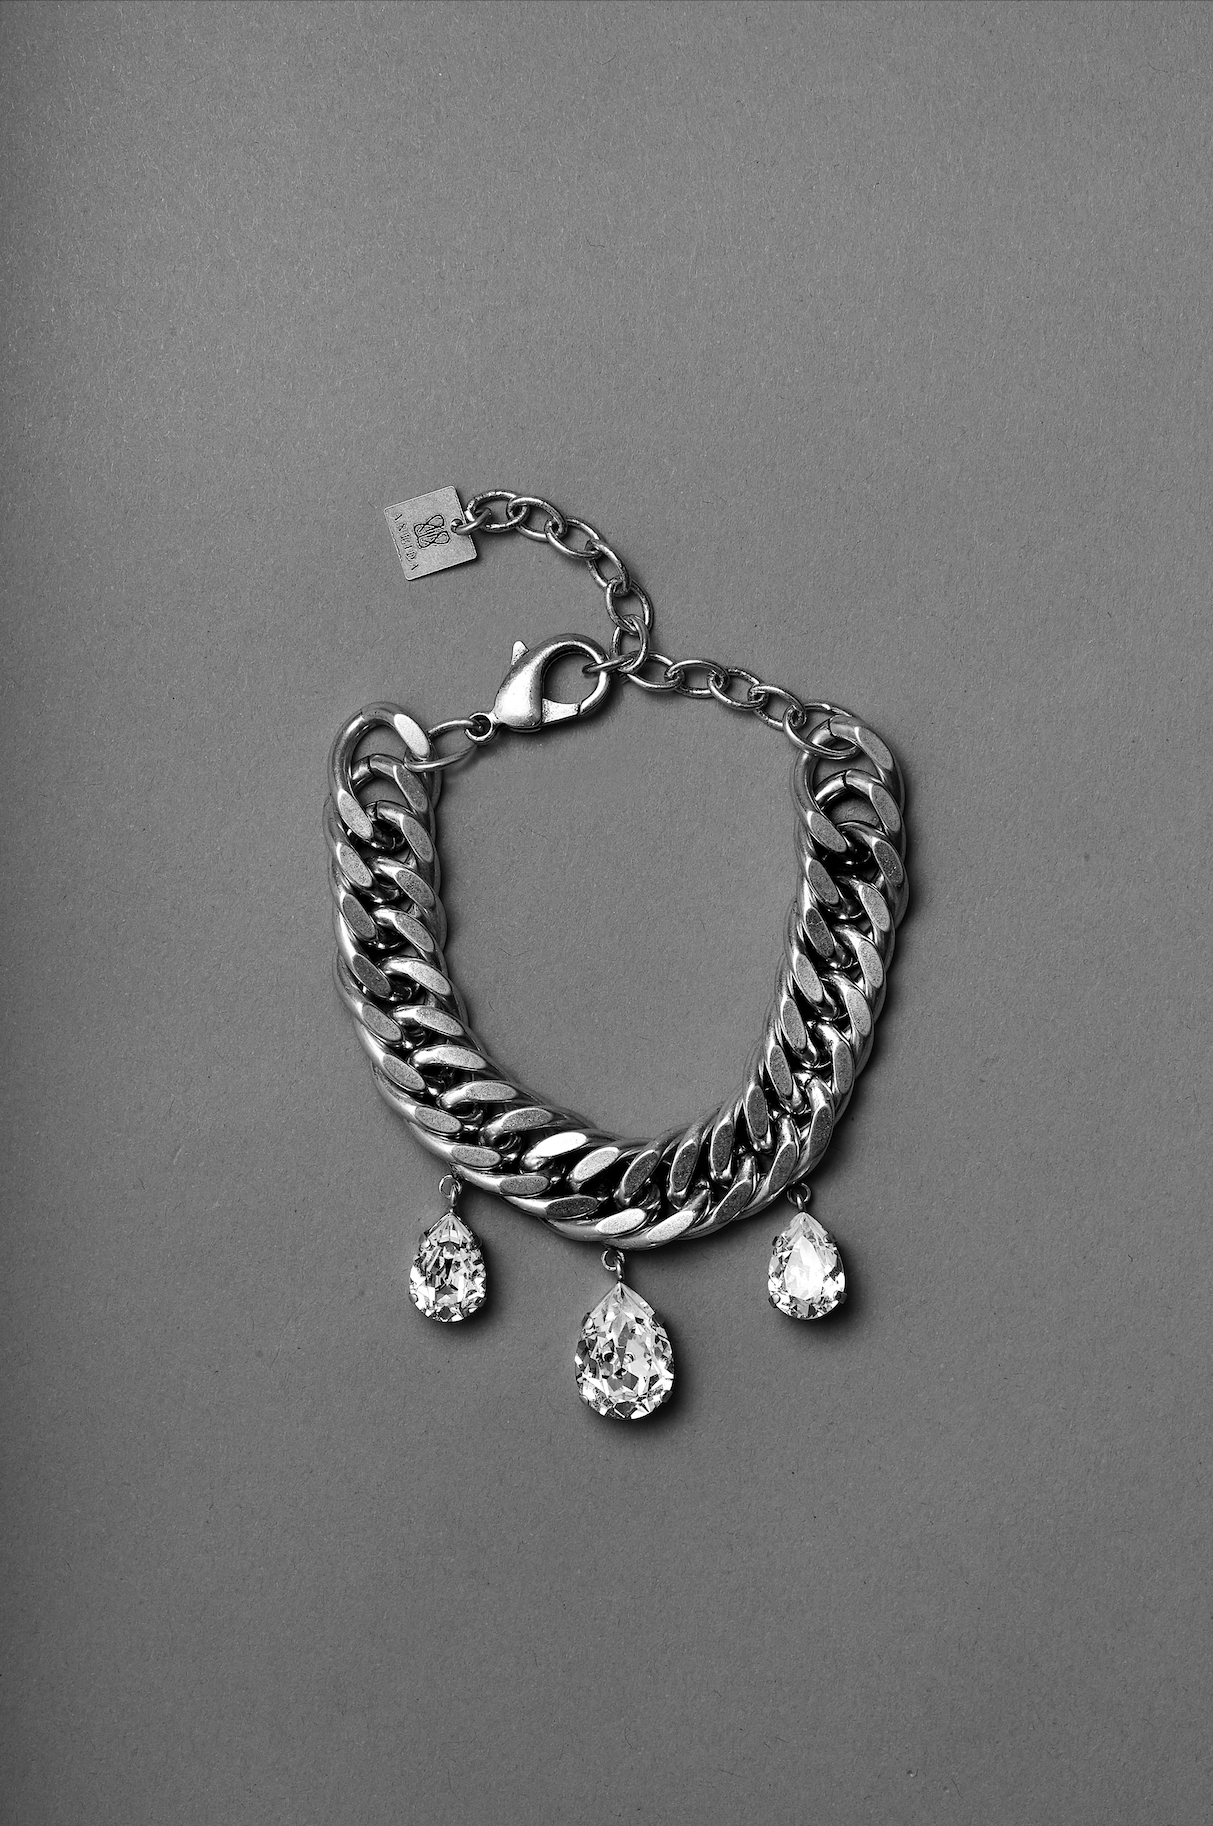 Adjustable bracelet by ANEIDA Jewelry made in silver plated brass with Swarovski clear crystals